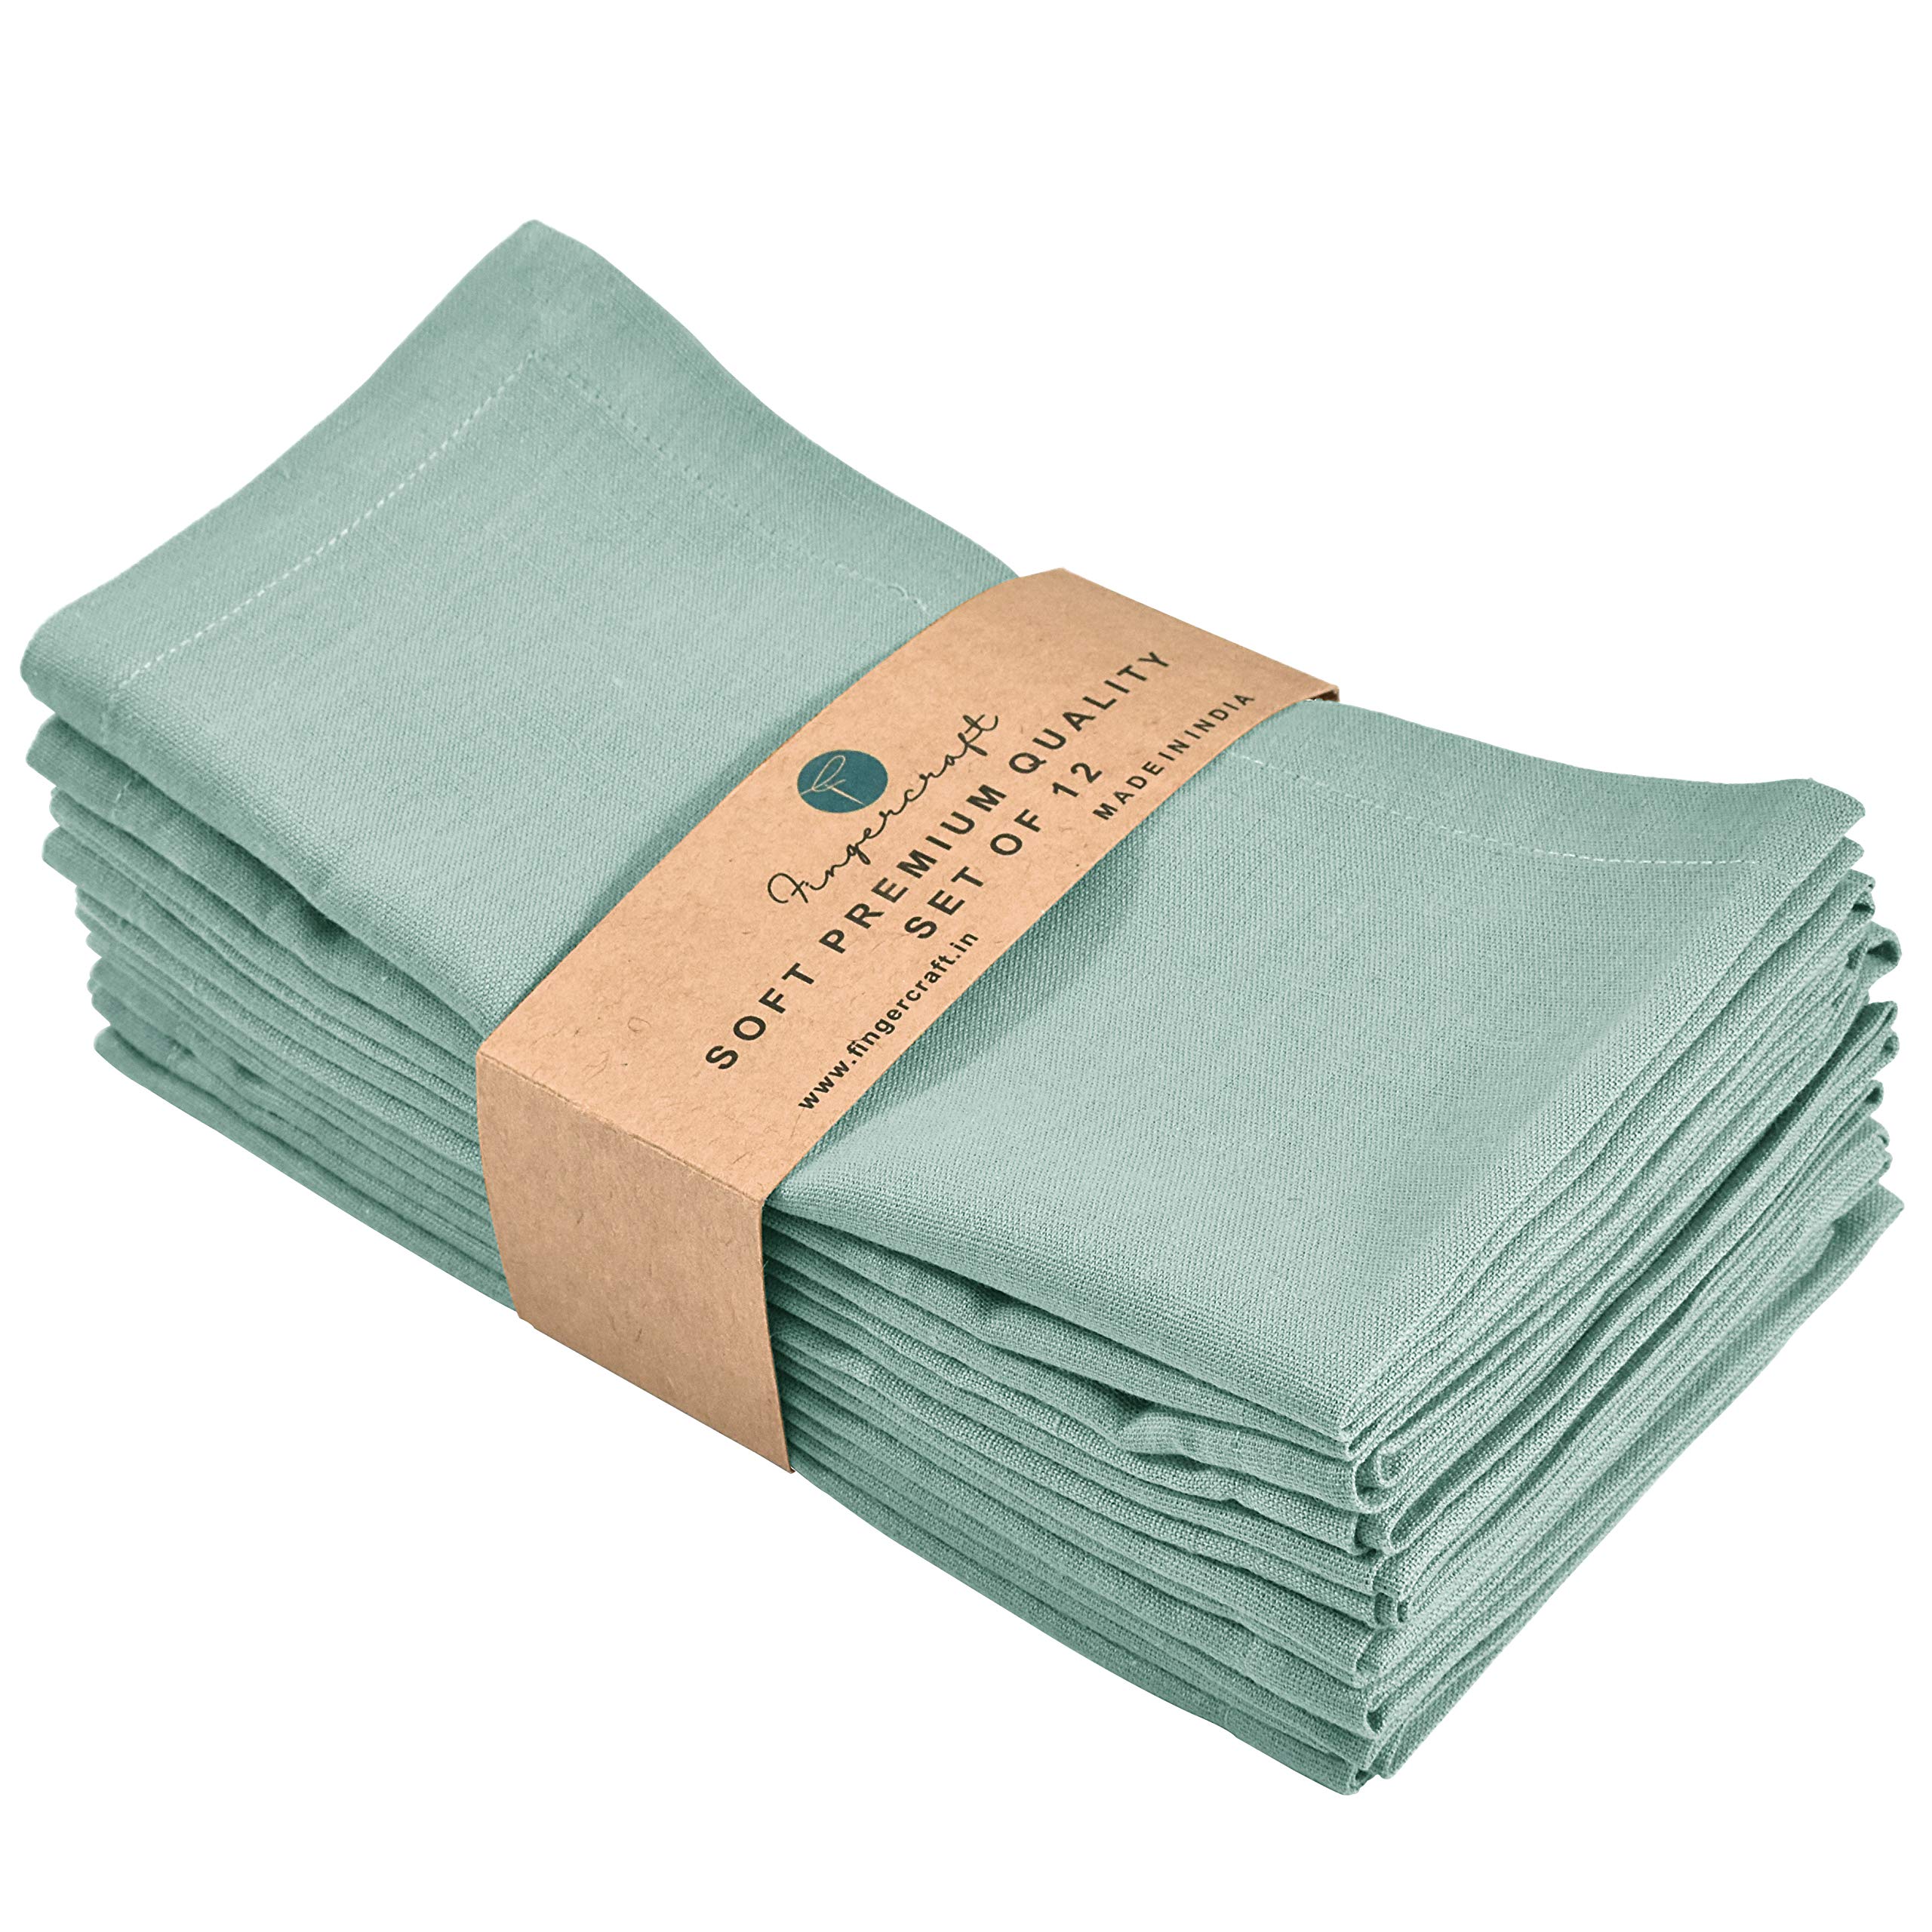 FINGERCRAFT Dinner Cloth Napkins in Cotton Linen Blend Fabric 12 Pack, Premium Quality, Mitered Corners for Every Day Use Napkins are Pre Shrunk and Good Absorbency Color (Aqua)